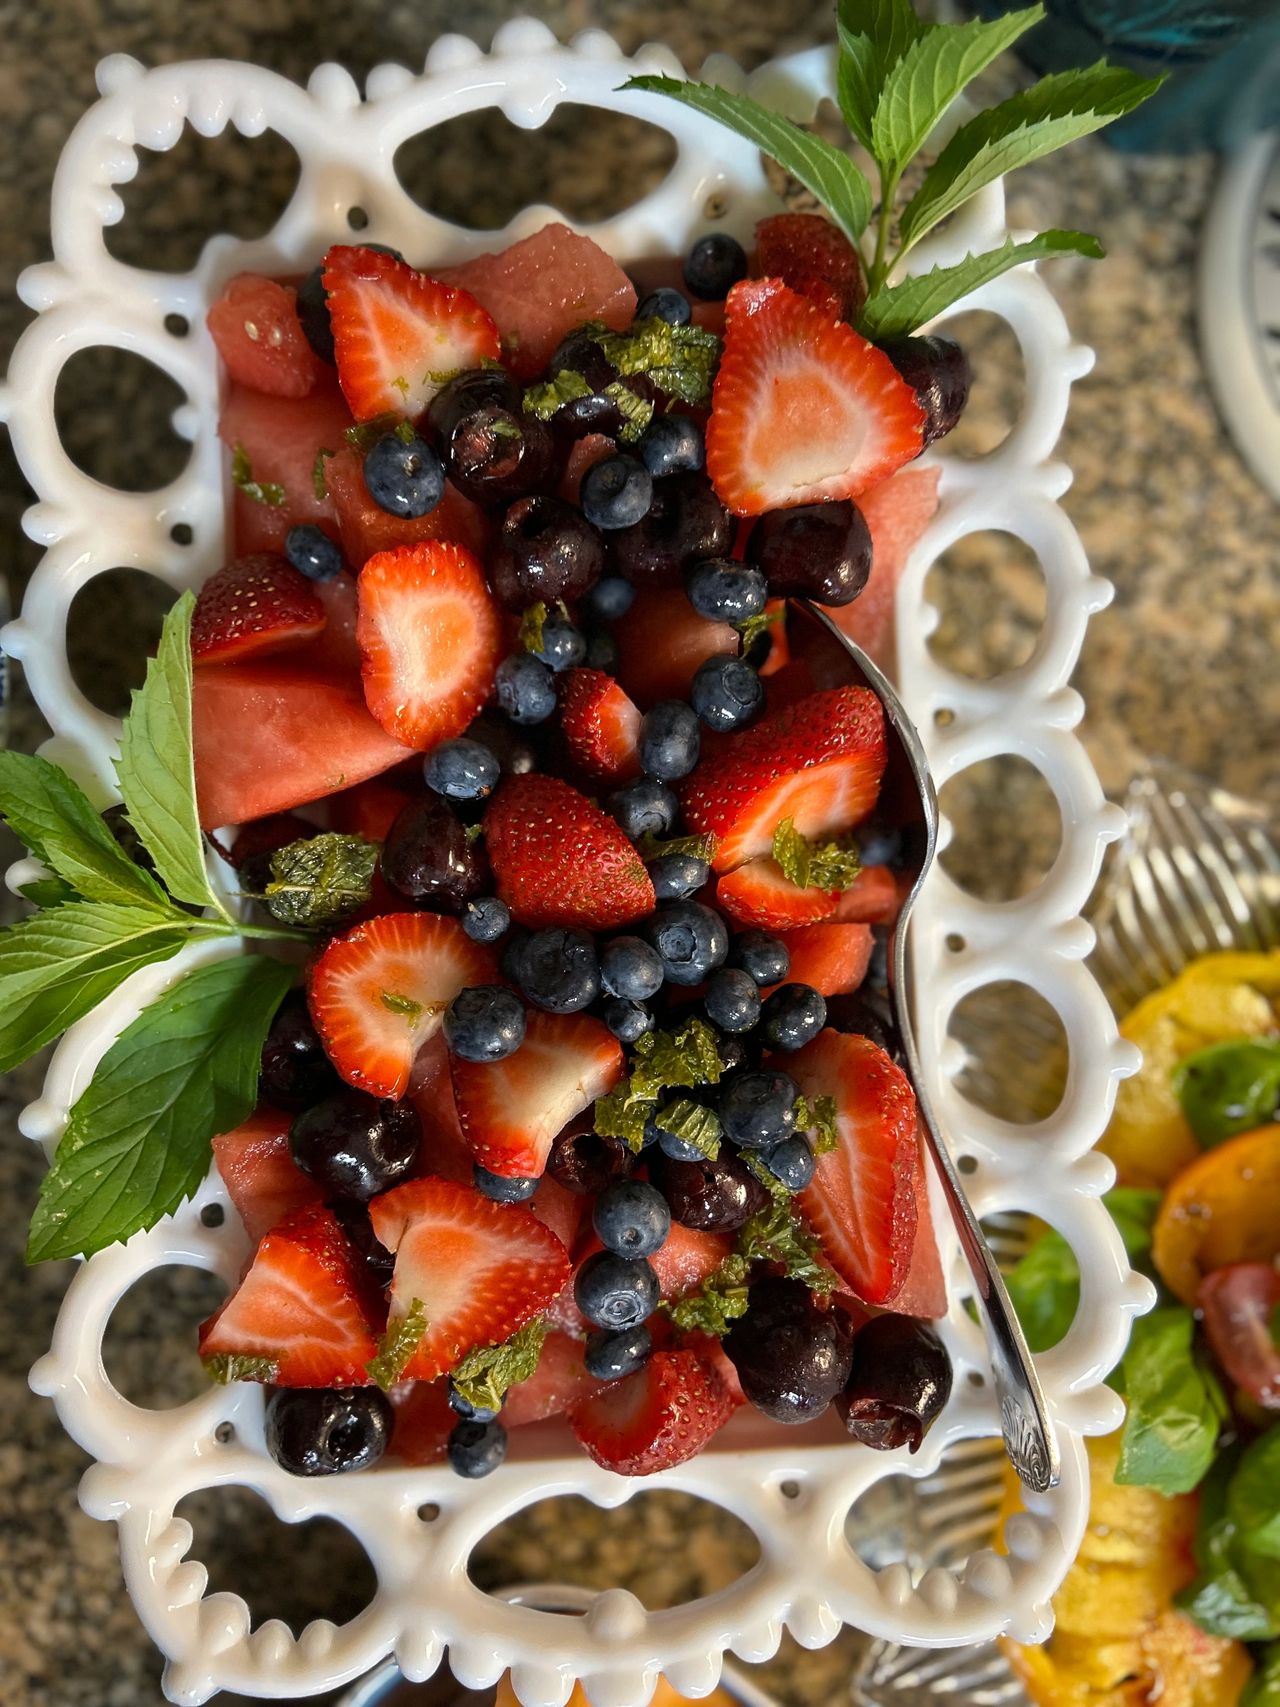 Watermelon, strawberries, blueberries in a white bowl